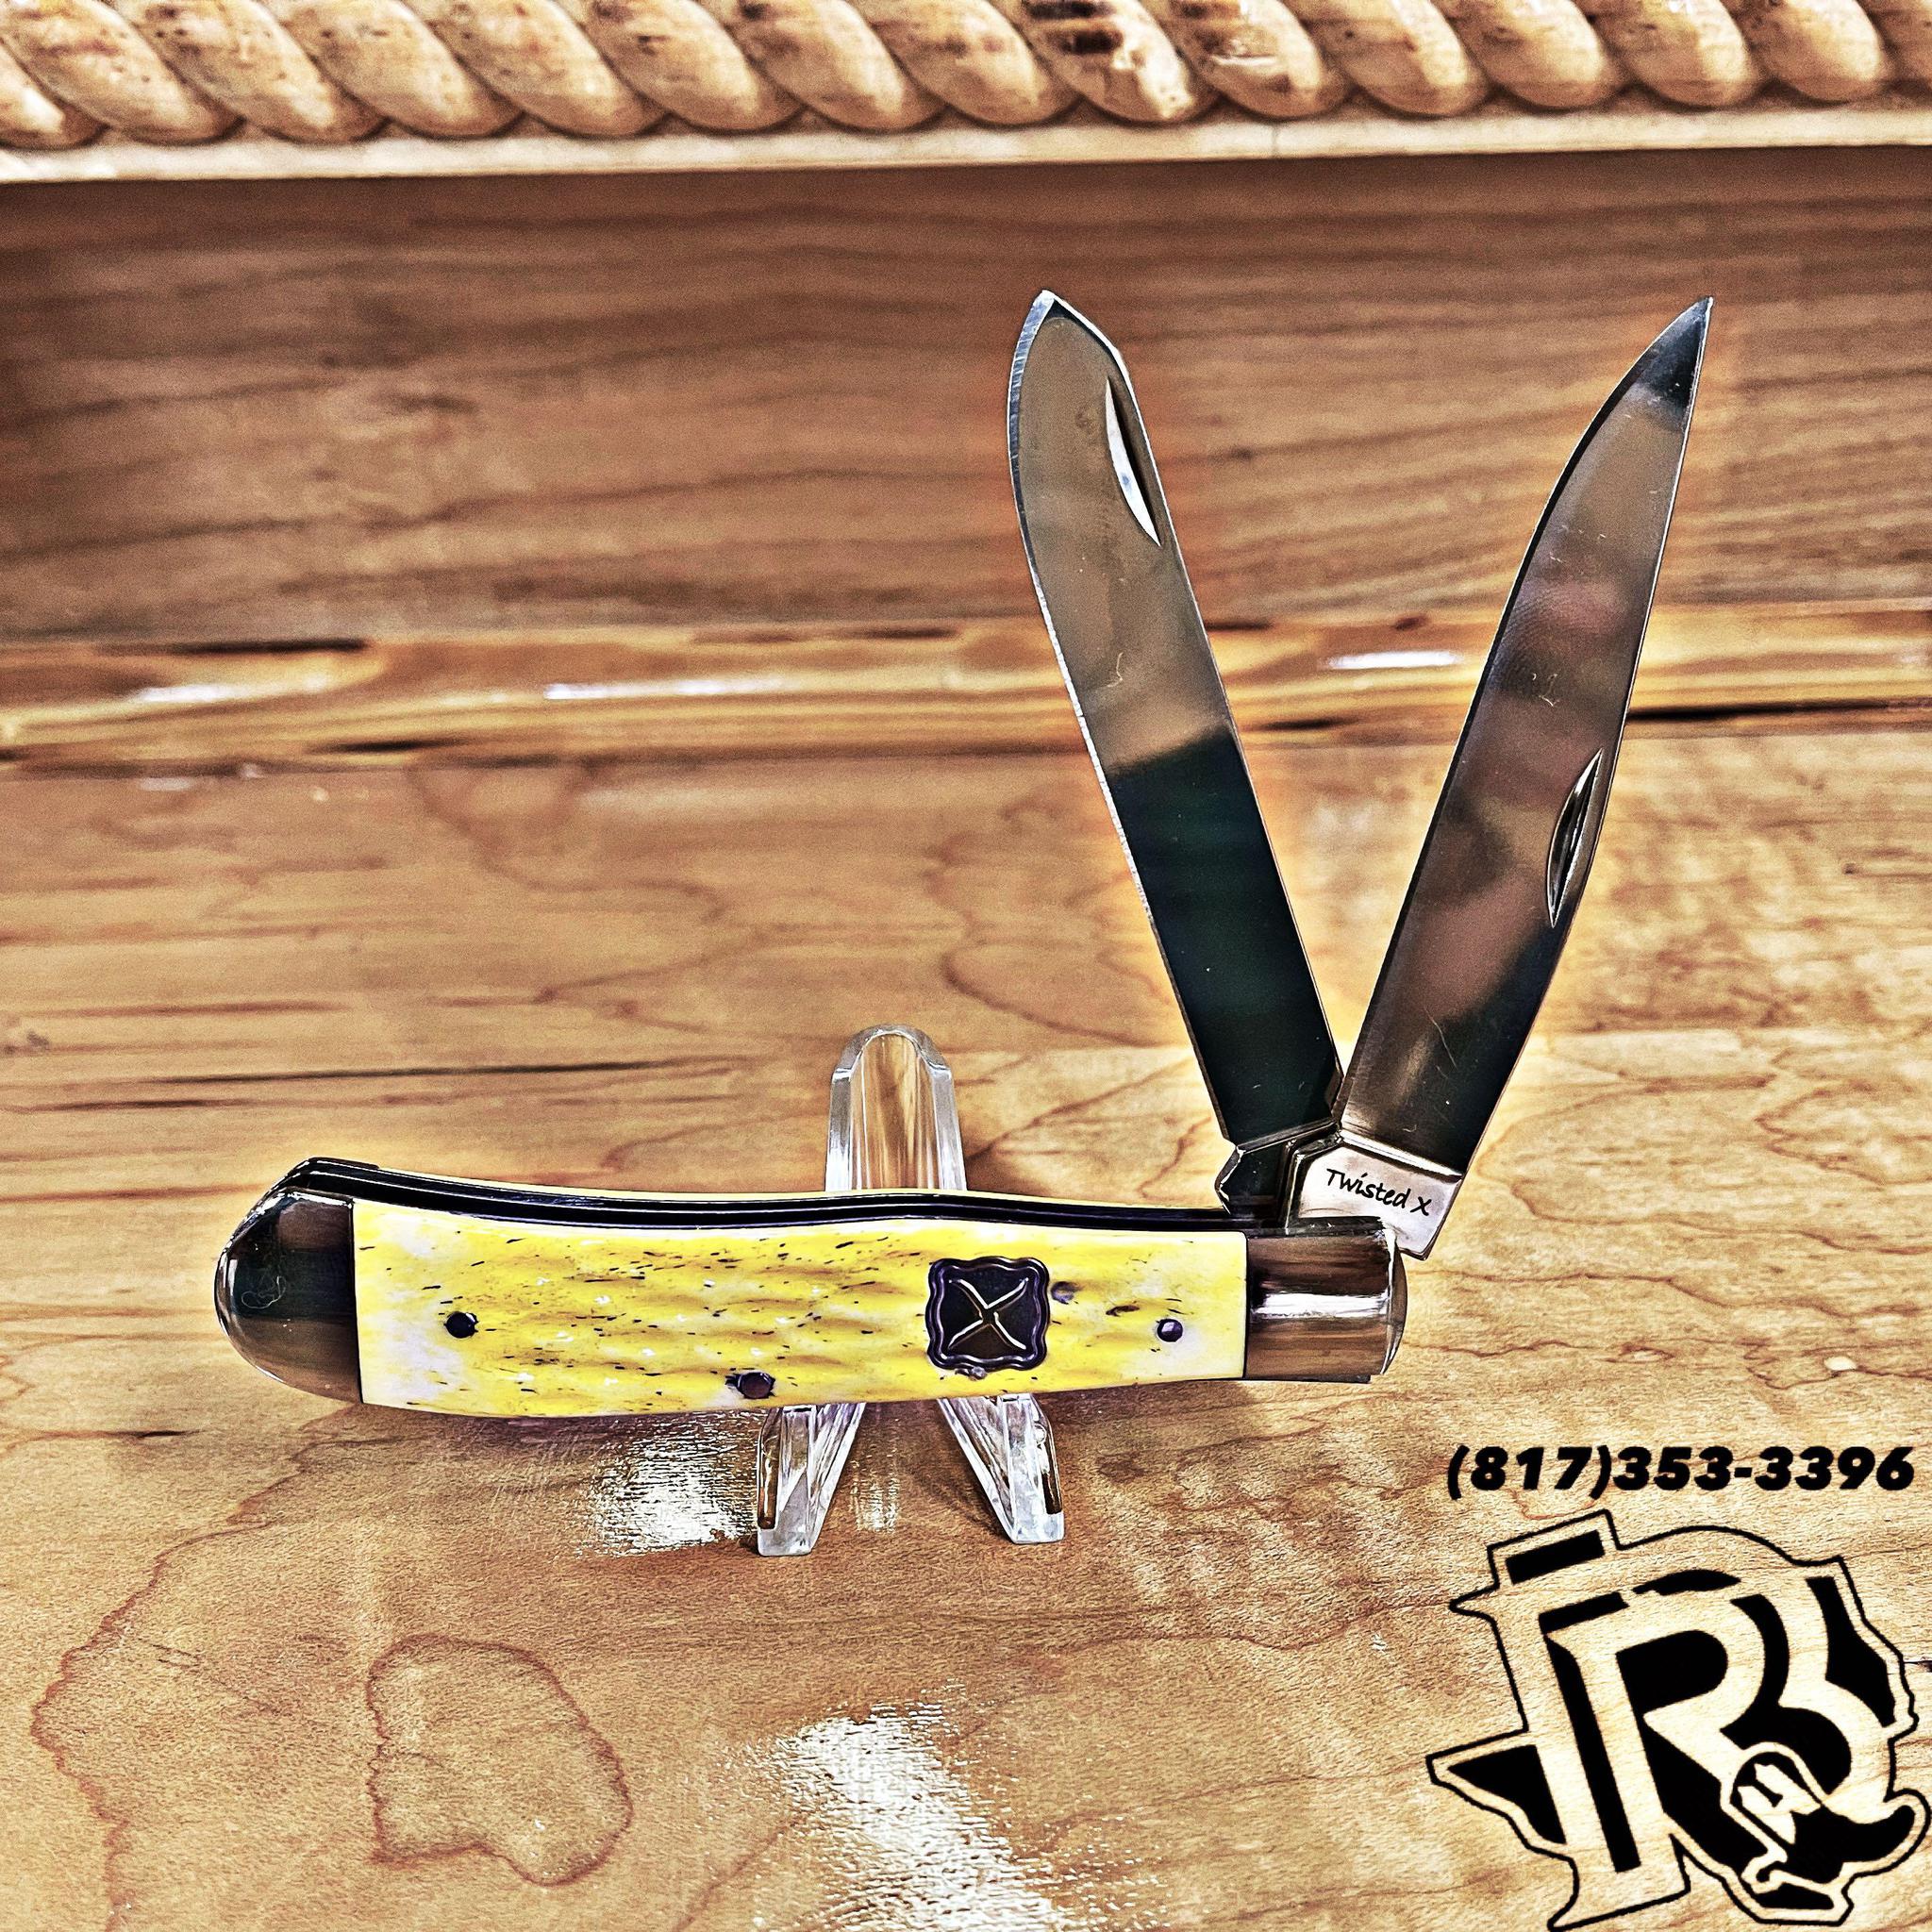 Twisted X KNIFE | 2 blade YELLOW handle knife